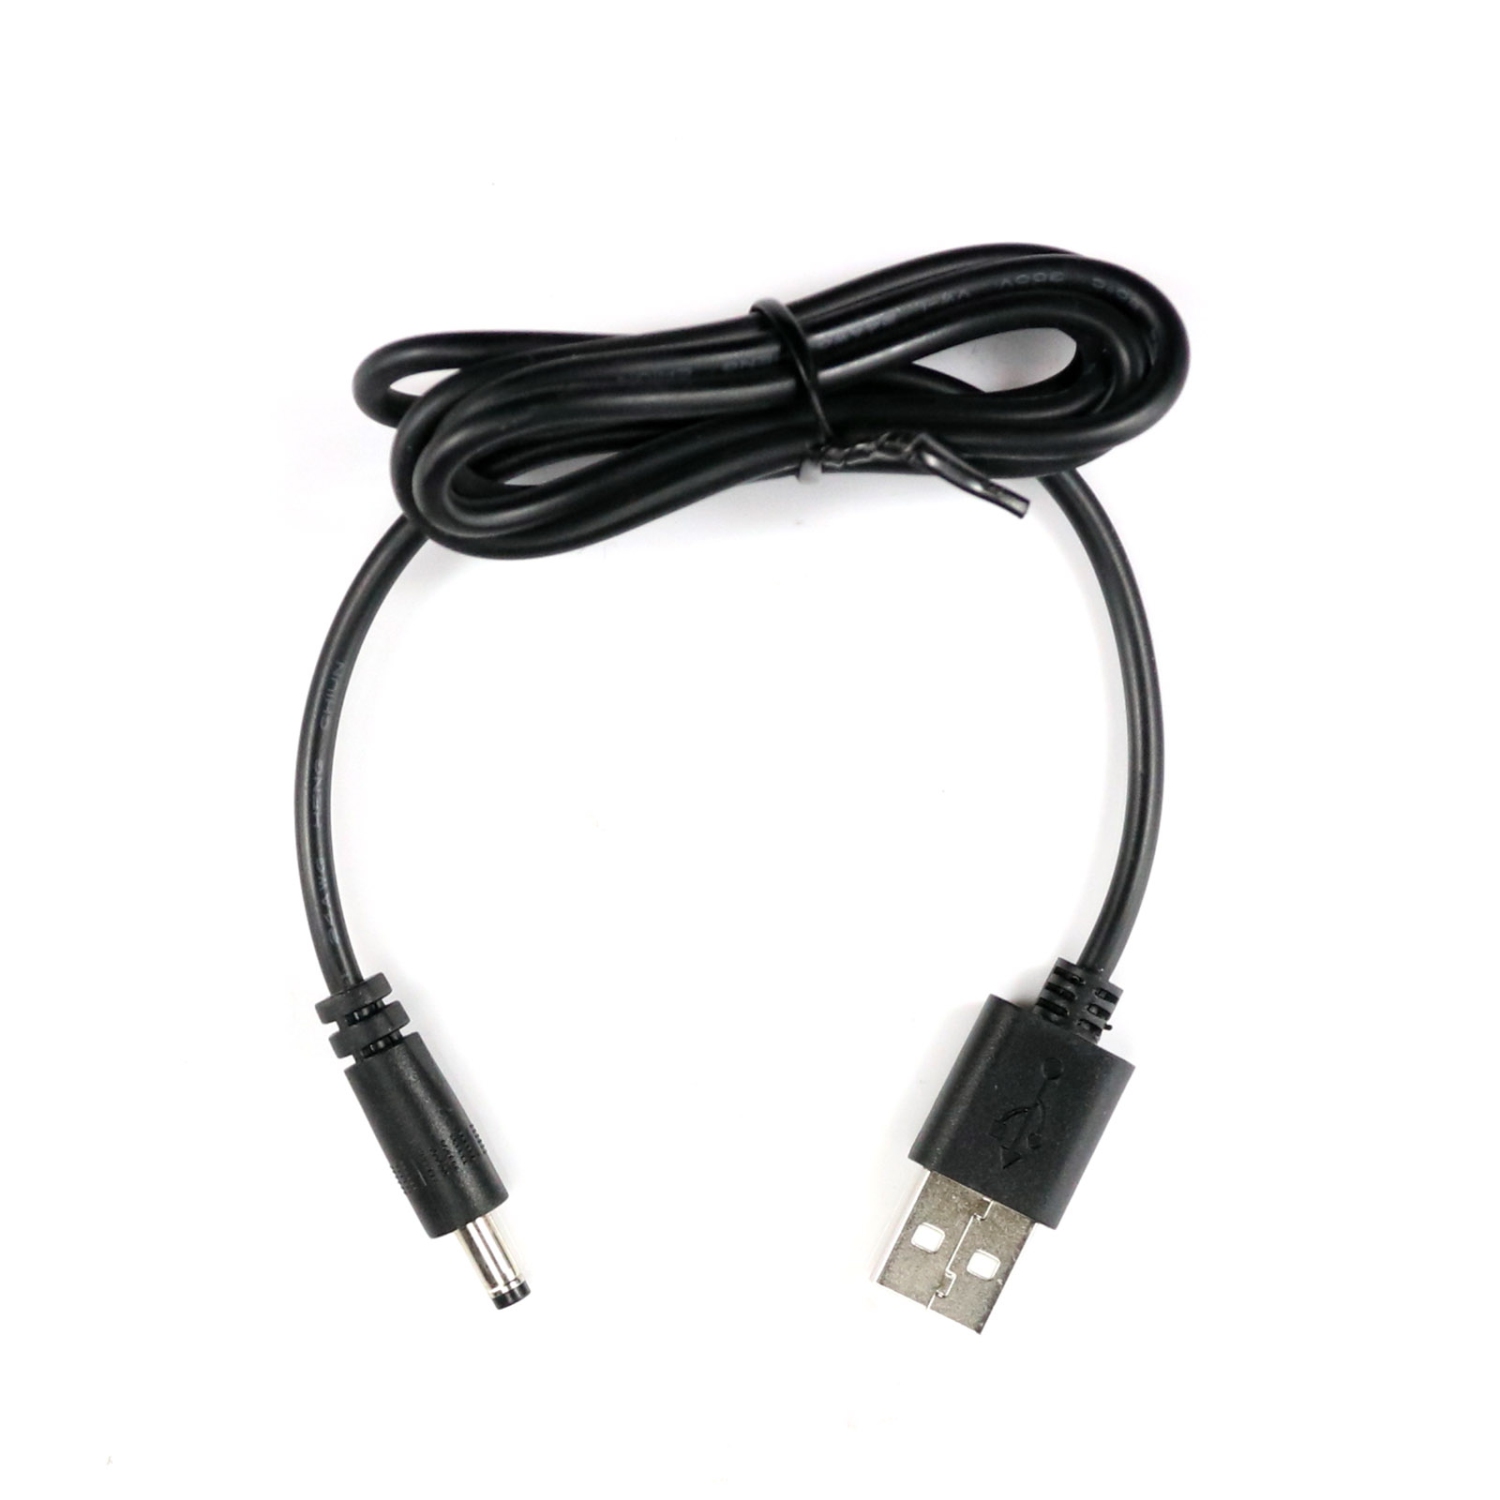 OEM USB Charger Cable for Propel Star Wars T-65 X-Wing TIE X1 74-Z Bike Drone Battery Charger- Refurbished